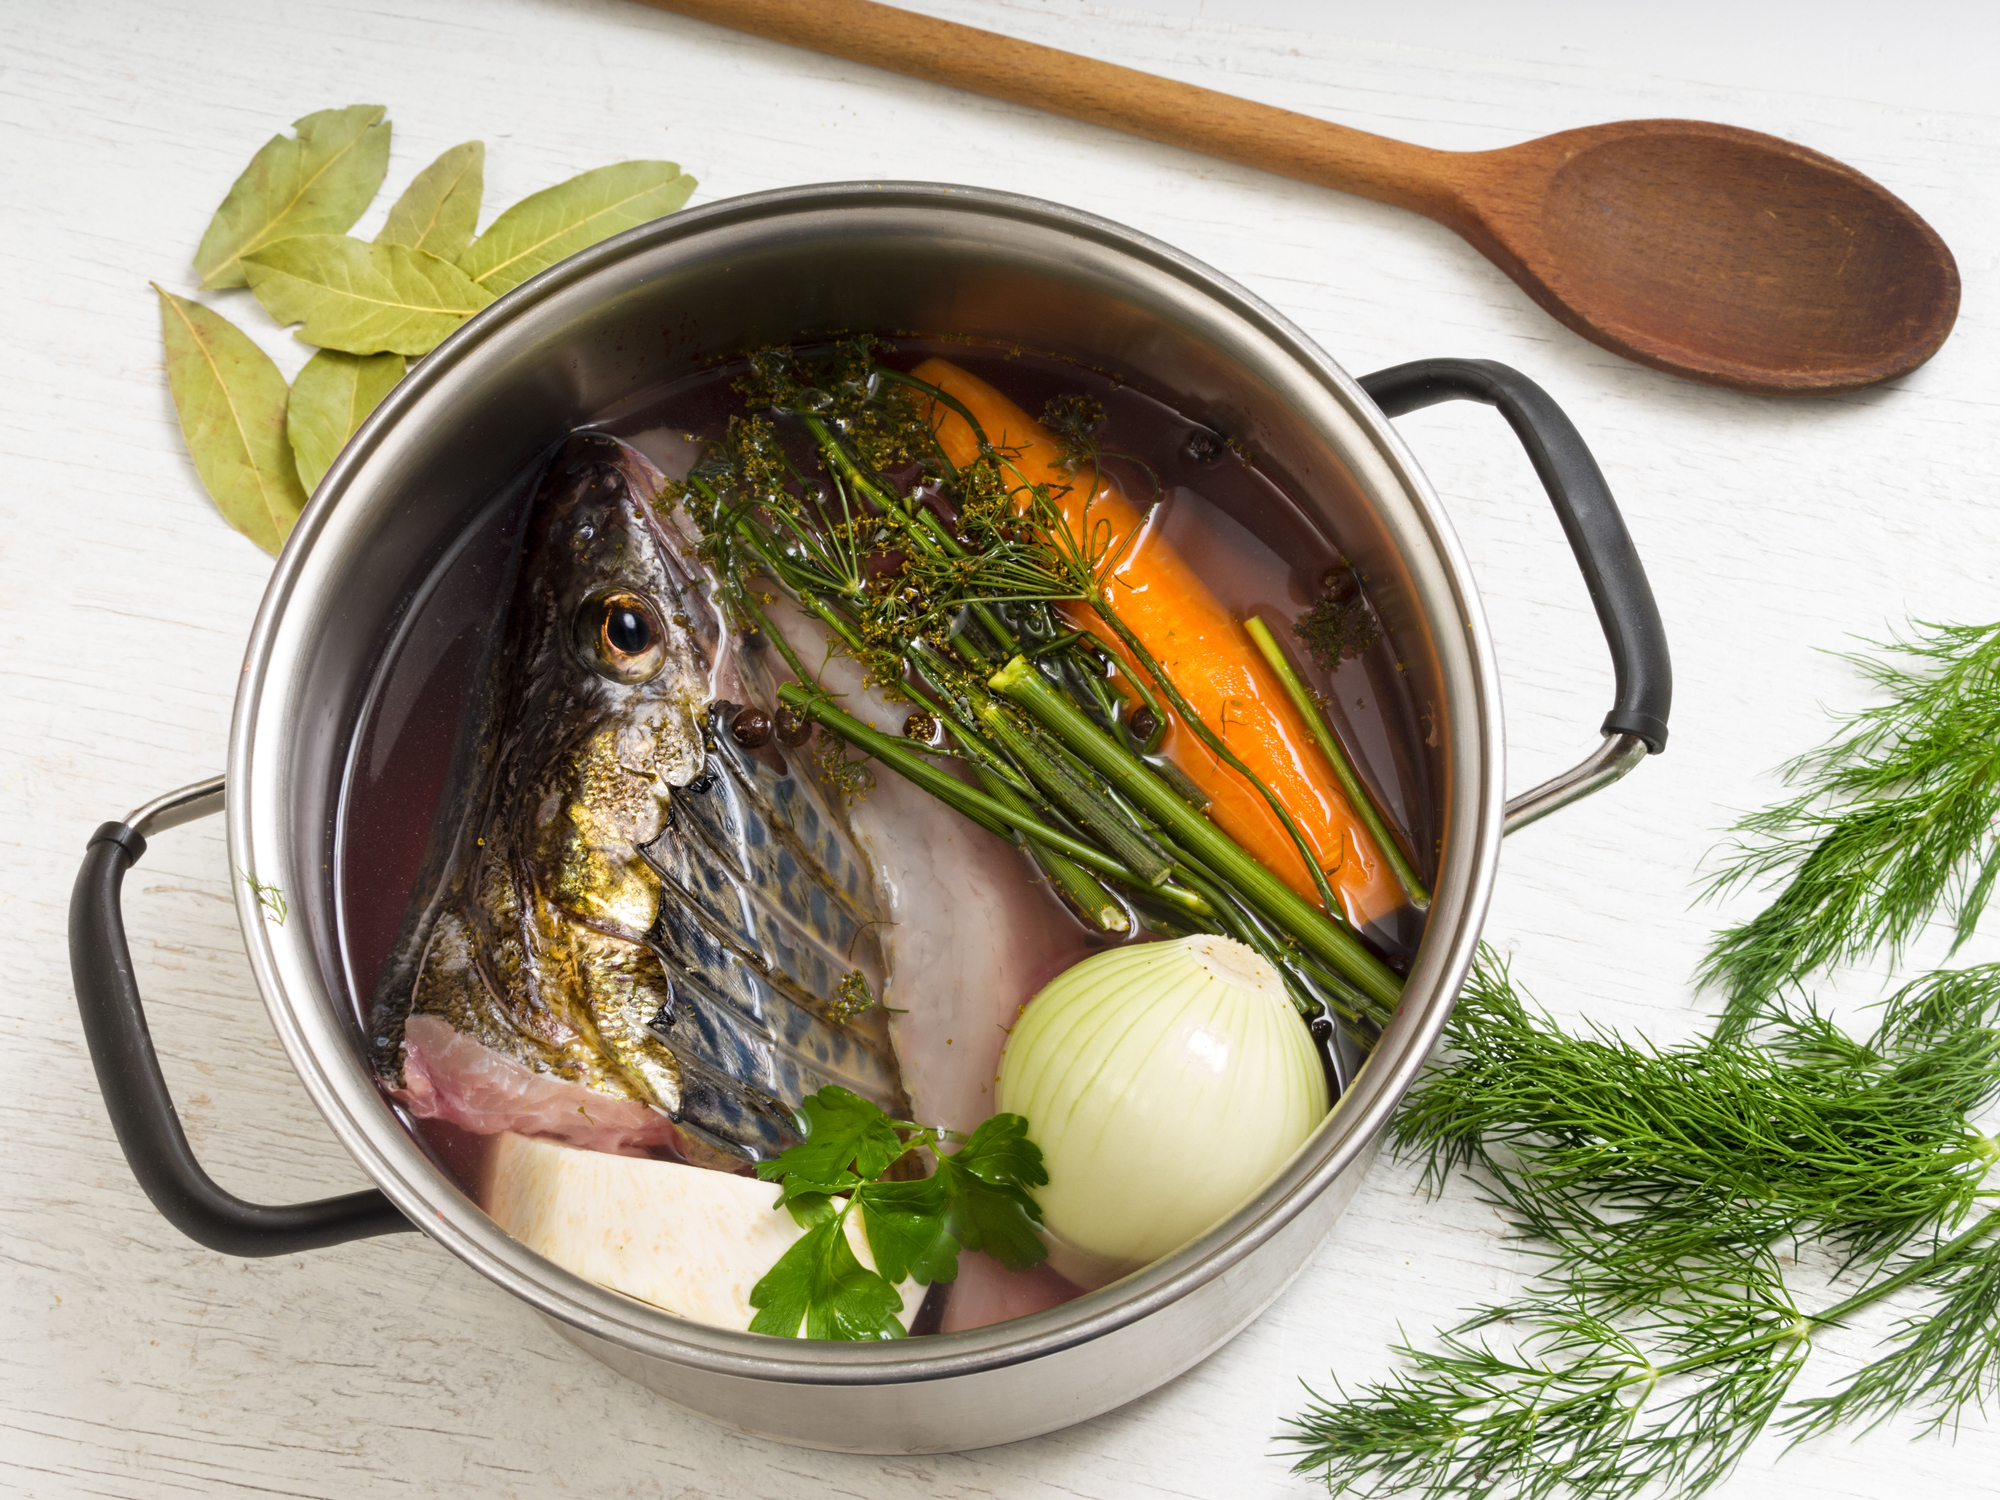 How To Make Fish Stock